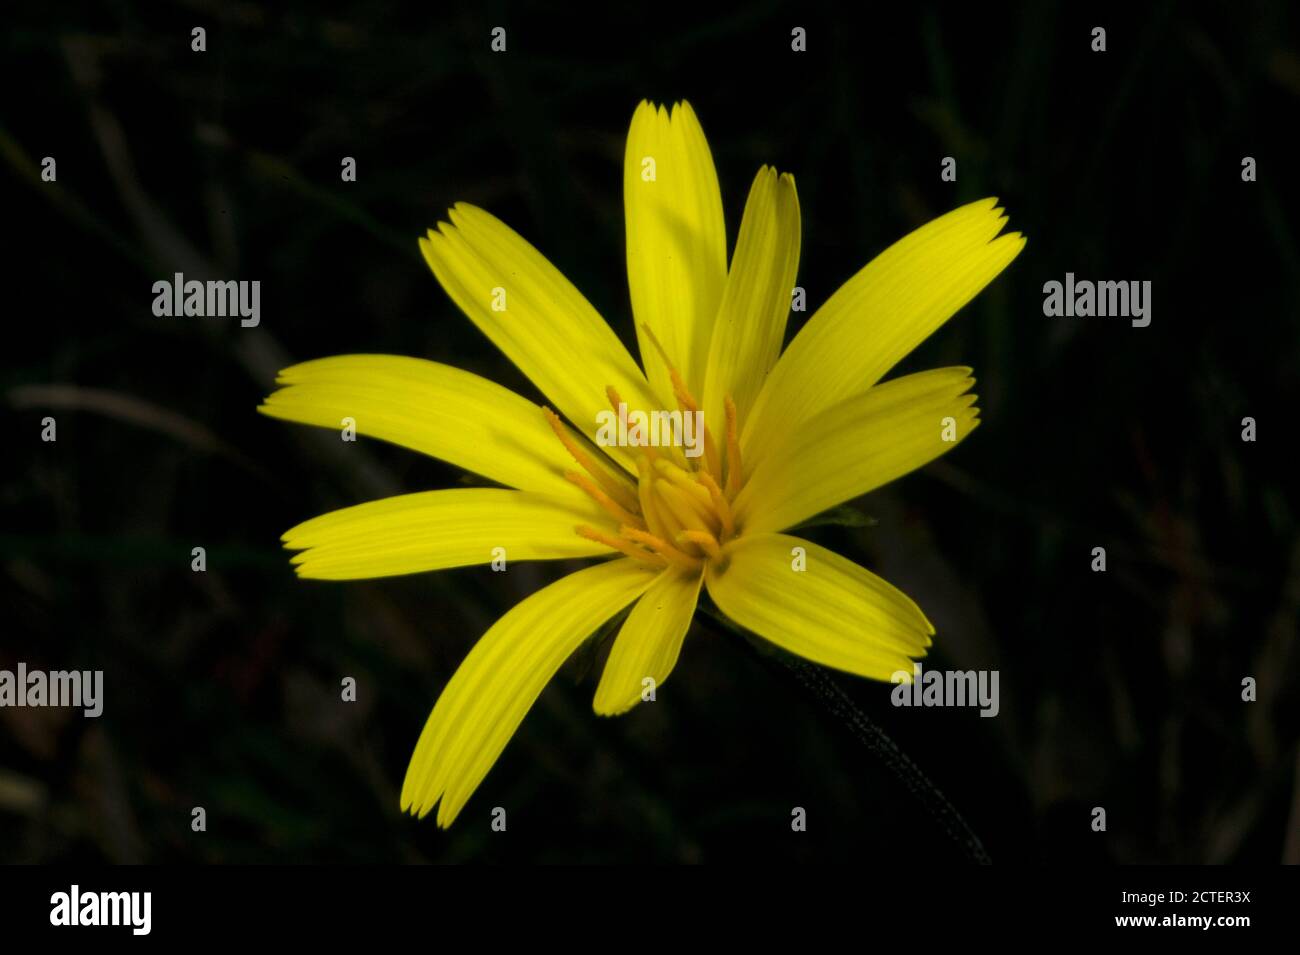 A Yam Daisy flower in full bloom with a gorgeous yellow flower - below ground is an edible tuber - which gives it its name. Stock Photo